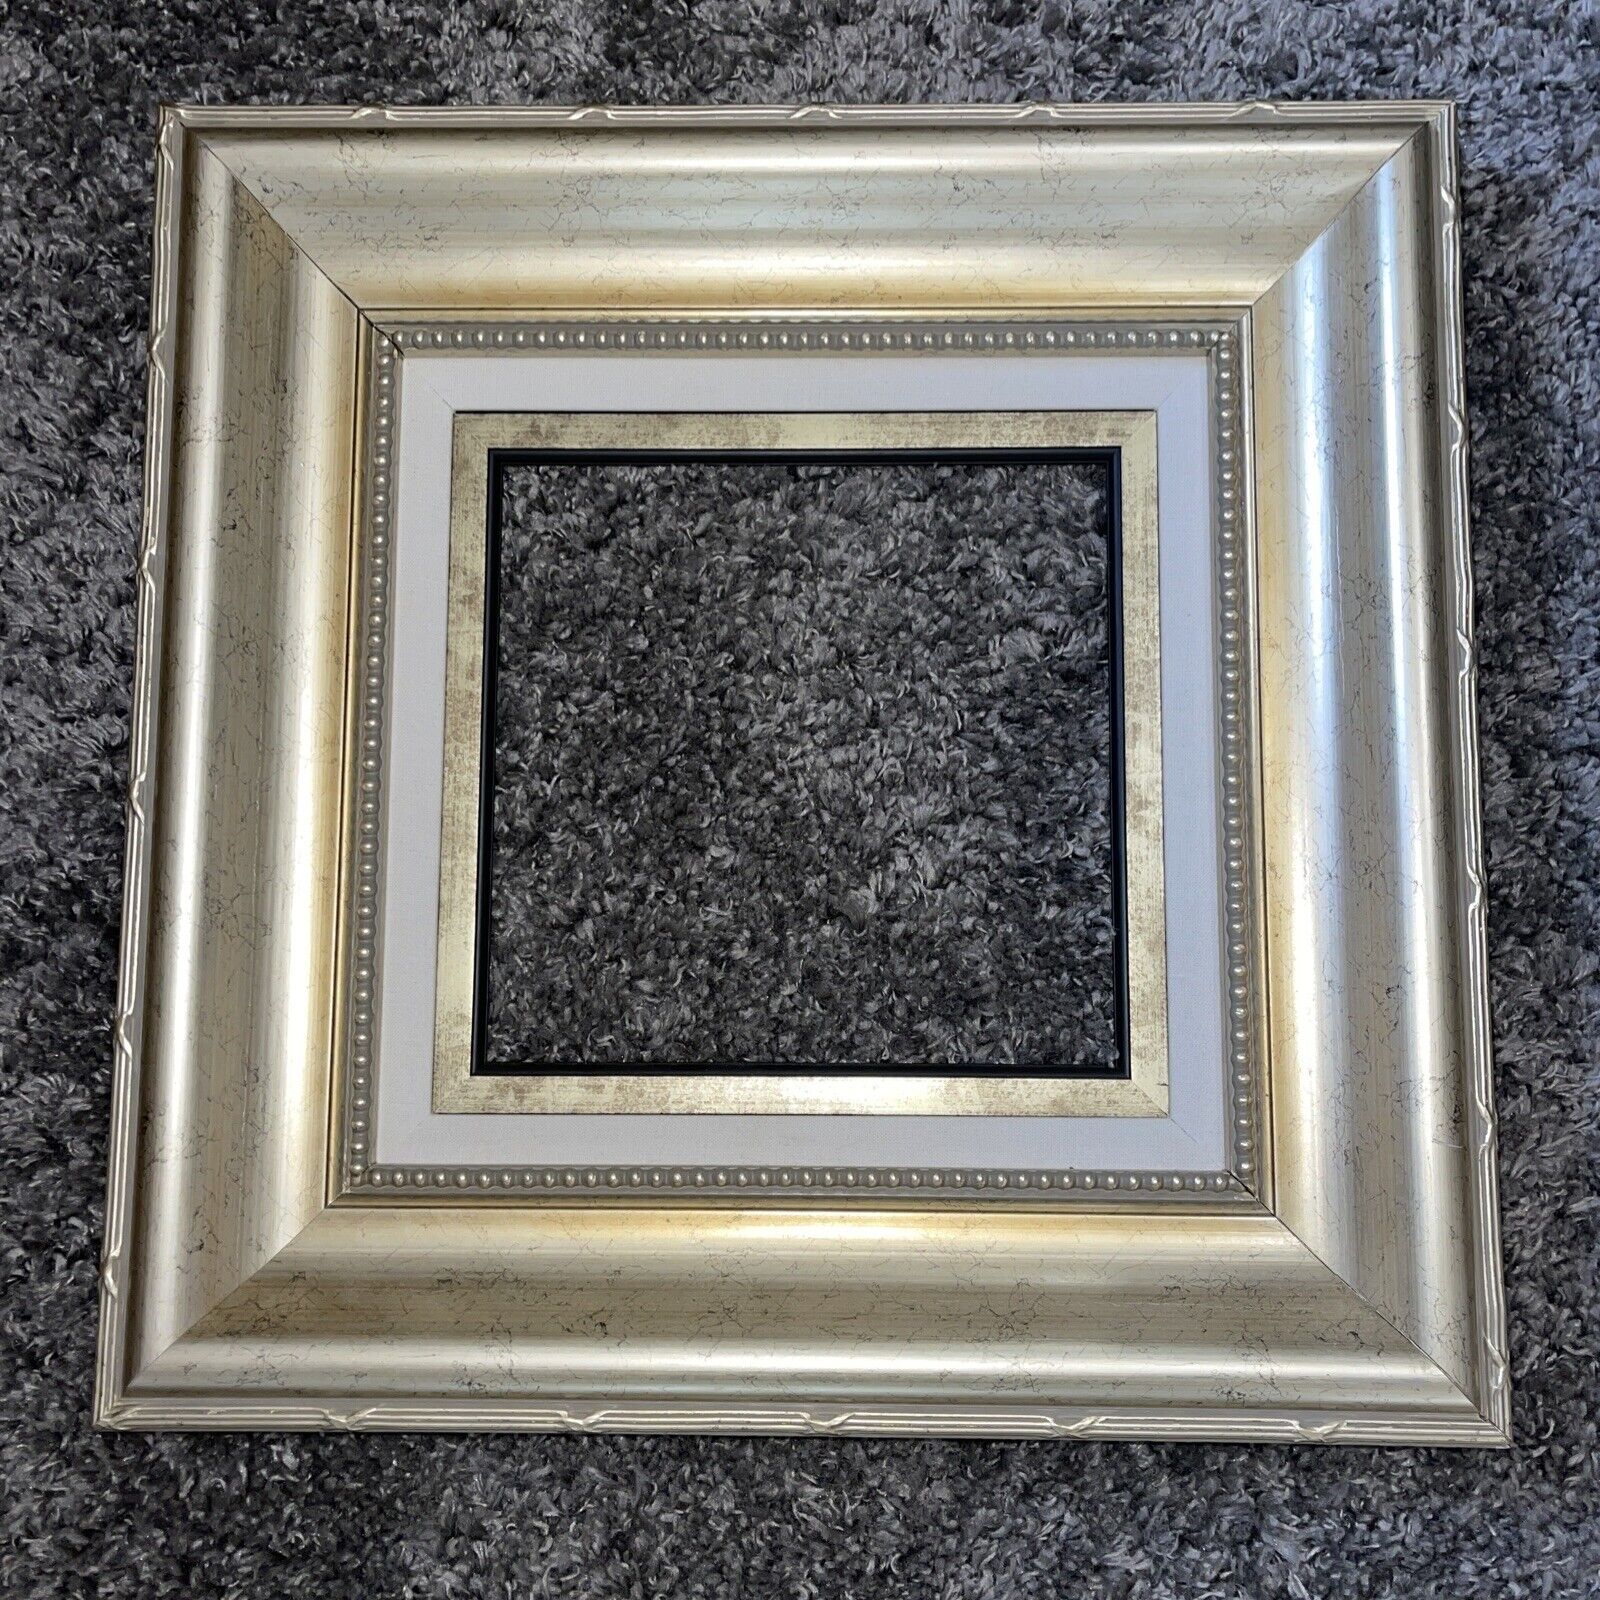 Wood Gold Silver Tone picture frame 10x9.75in “NO GLASS” Custom Ornate Detailed